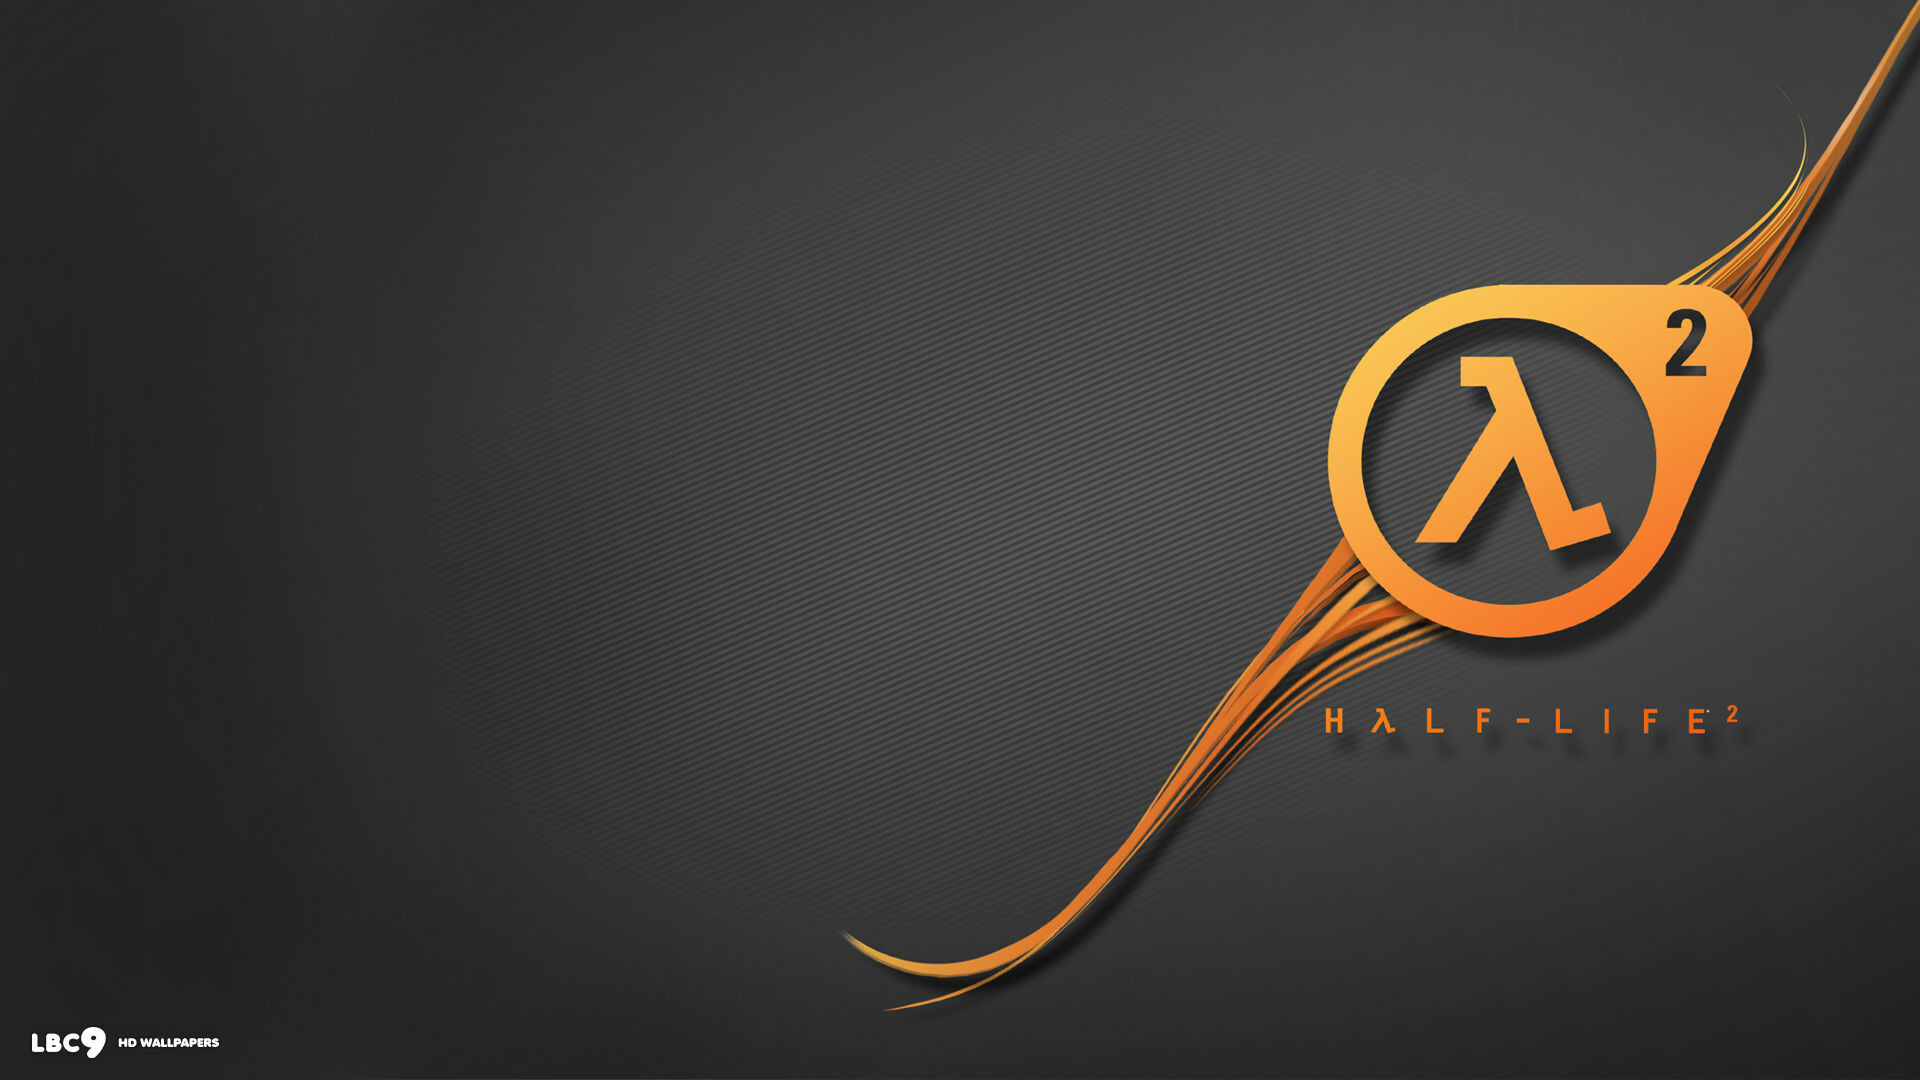 Half-Life 2: Earned 39 Game of the Year awards, including Overall Game of the Year at IGN. 1920x1080 Full HD Background.